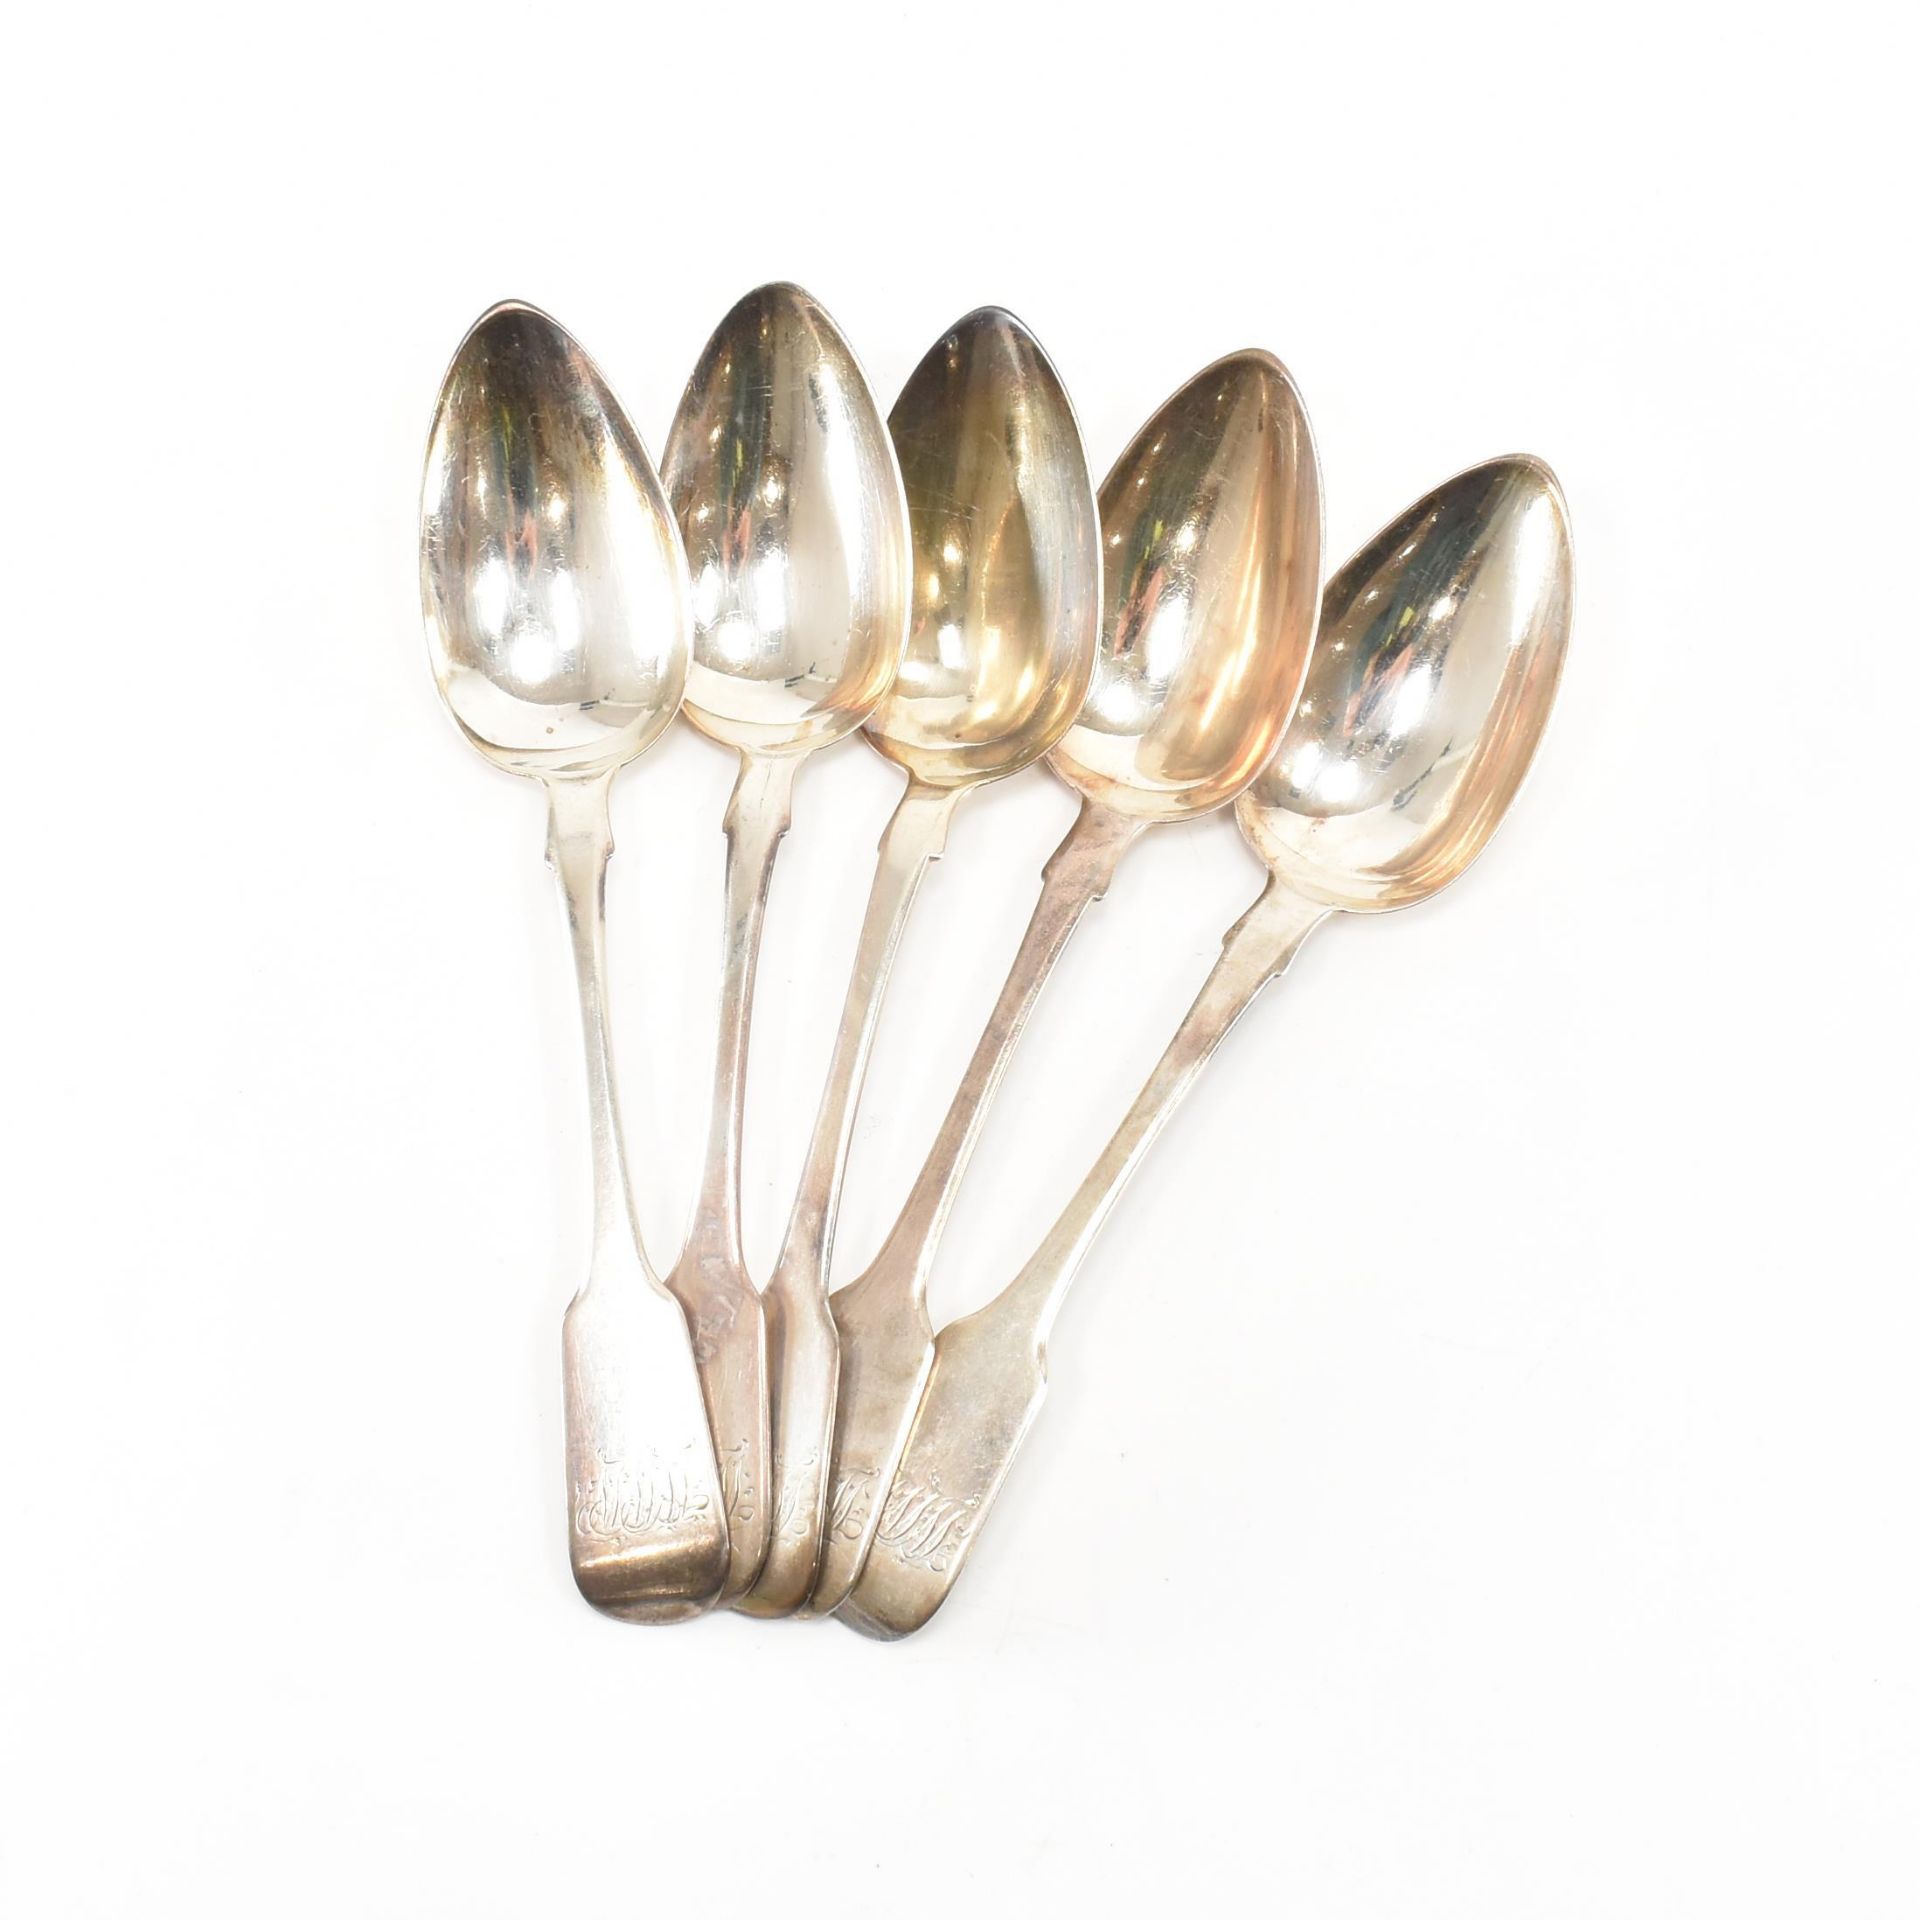 FIVE WILLIAM IV SILVER FIDDLE PATTERN TABLESPOONS